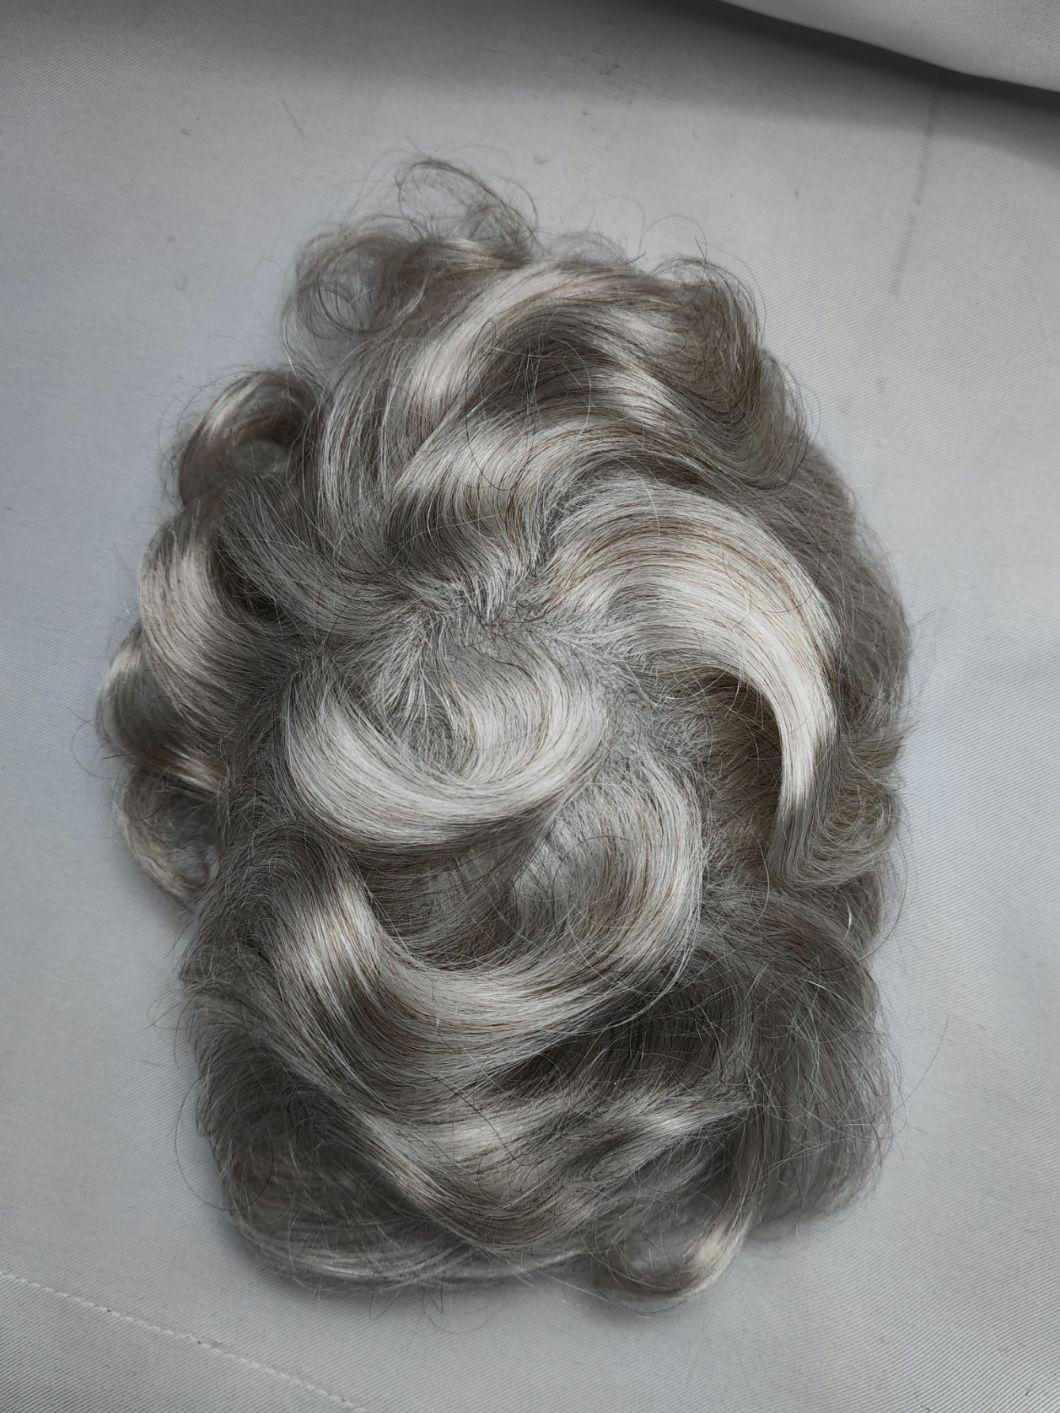 2022 Most Natural Super Thin Poly Human Hairpiece Made of Remy Human Hair (V-Looping)